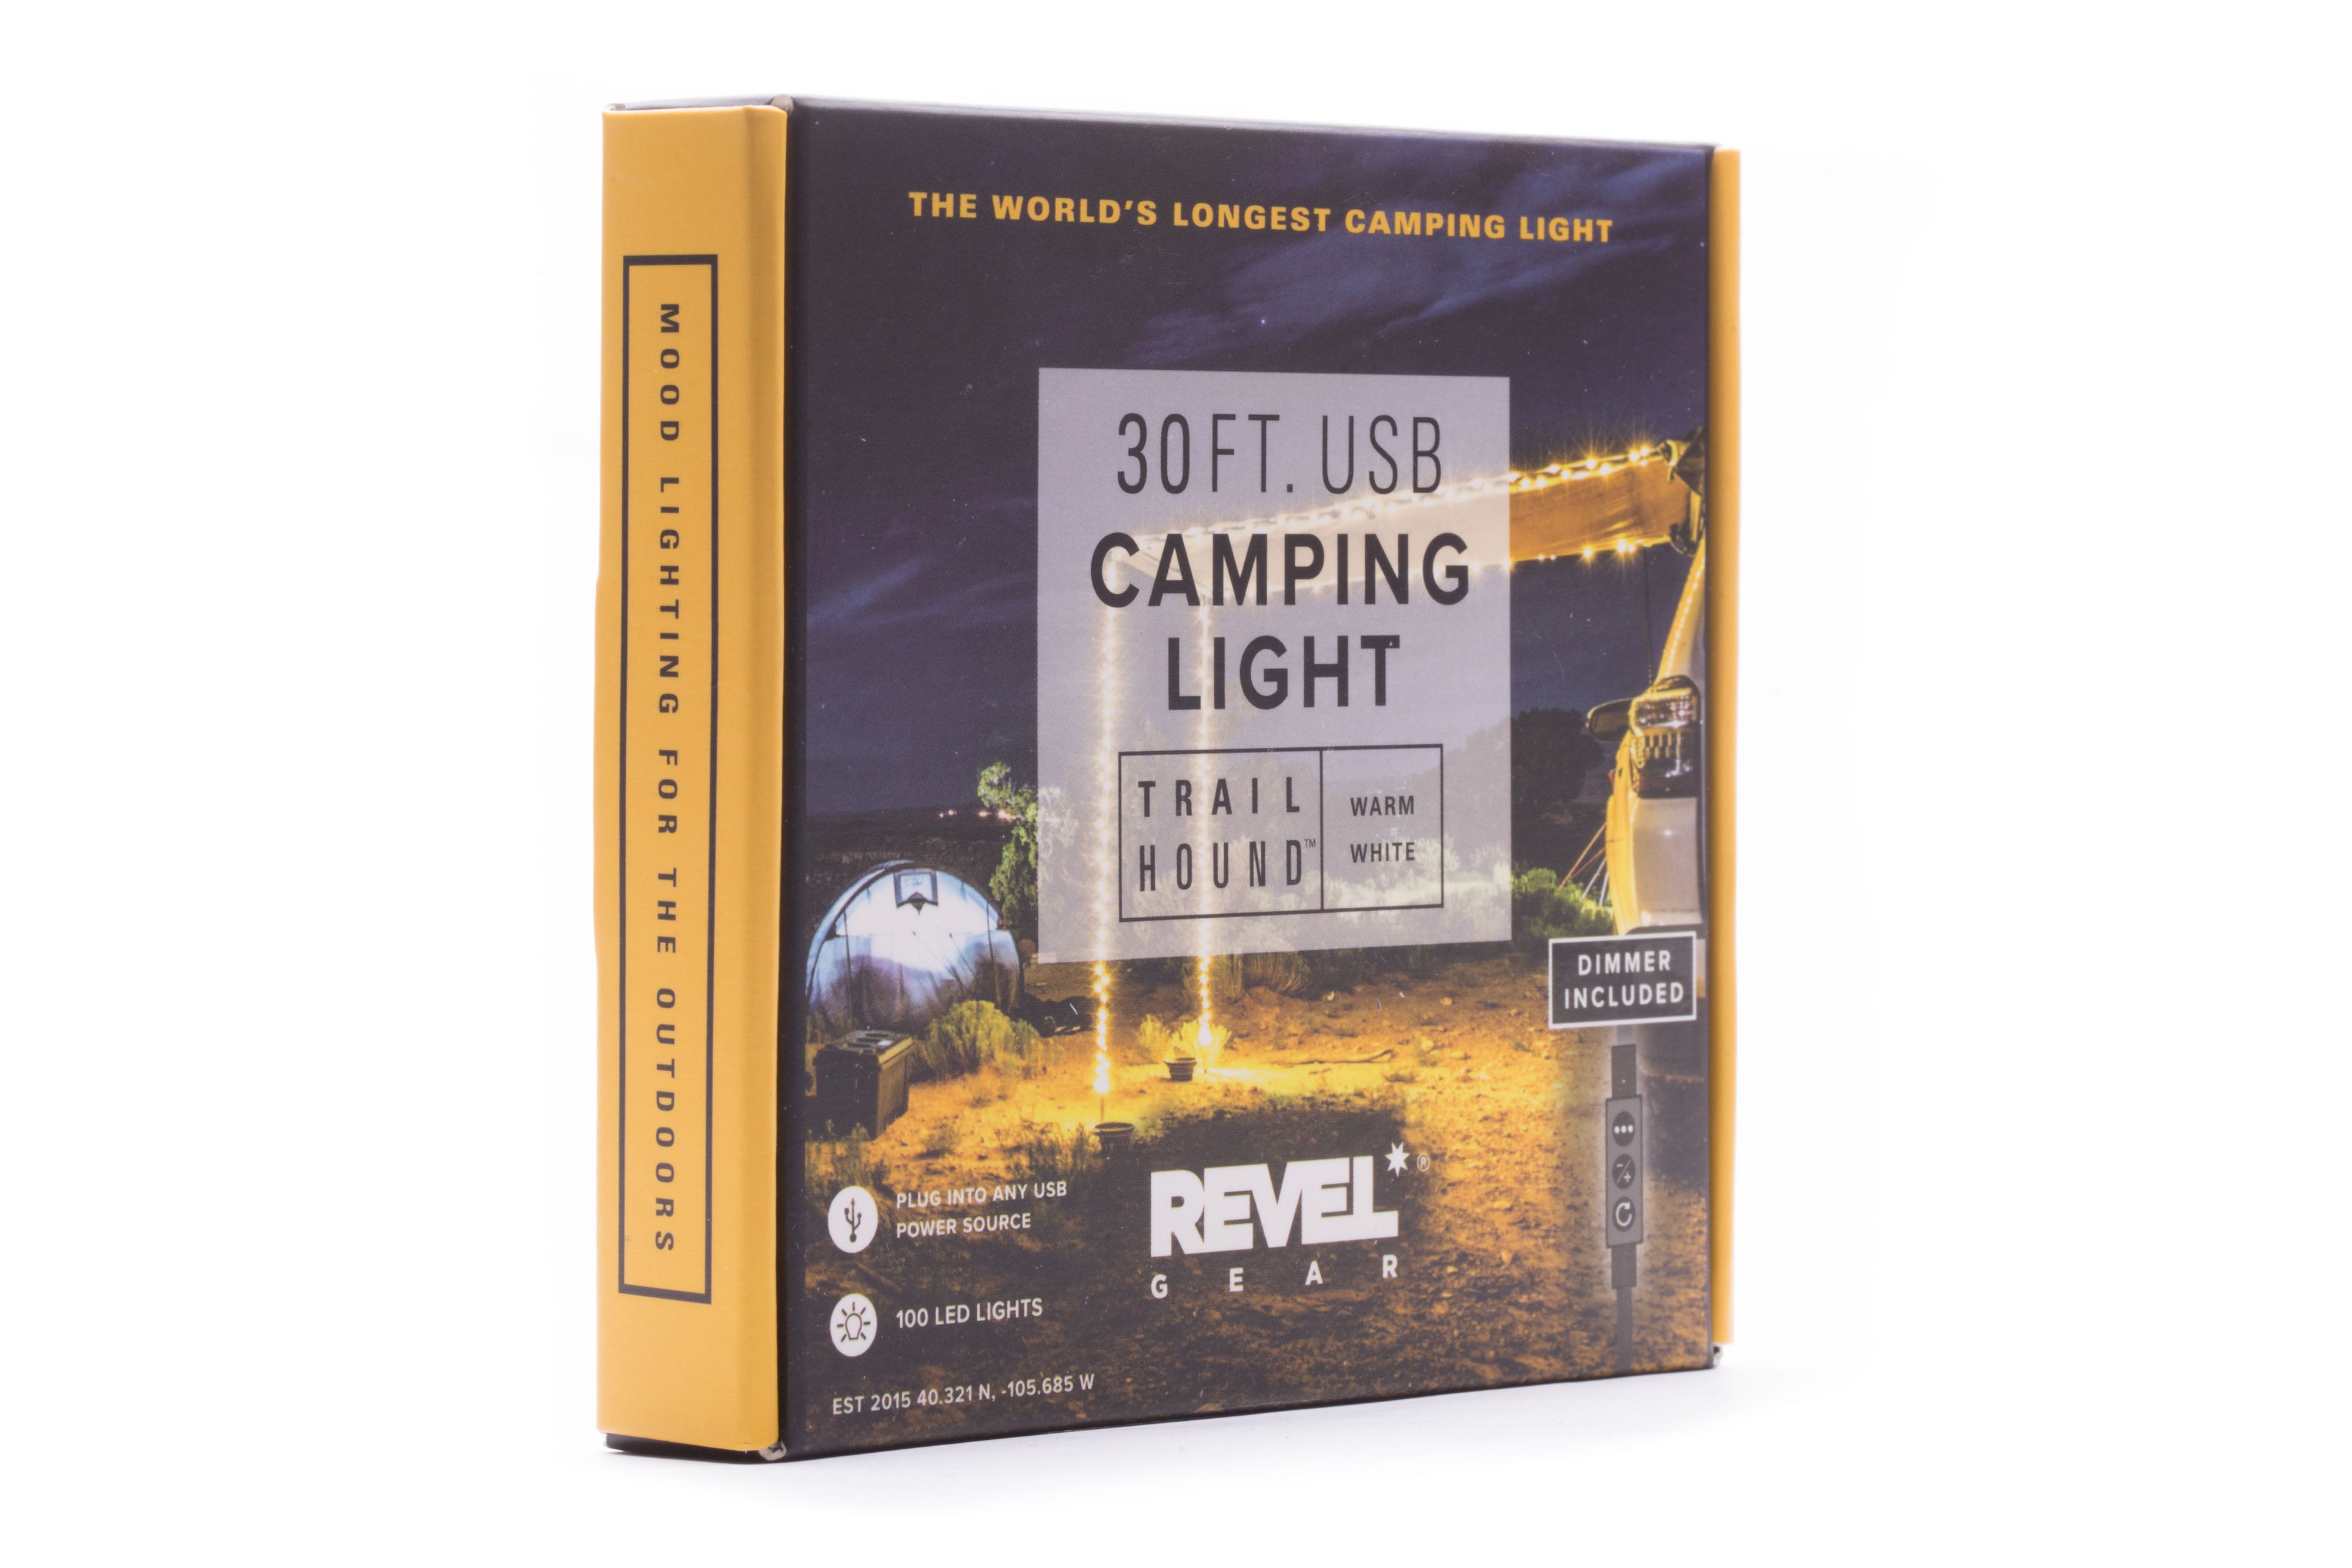 Revel Gear Trail Hound 30ft Camping Light Soft (warm) White with Dimmer